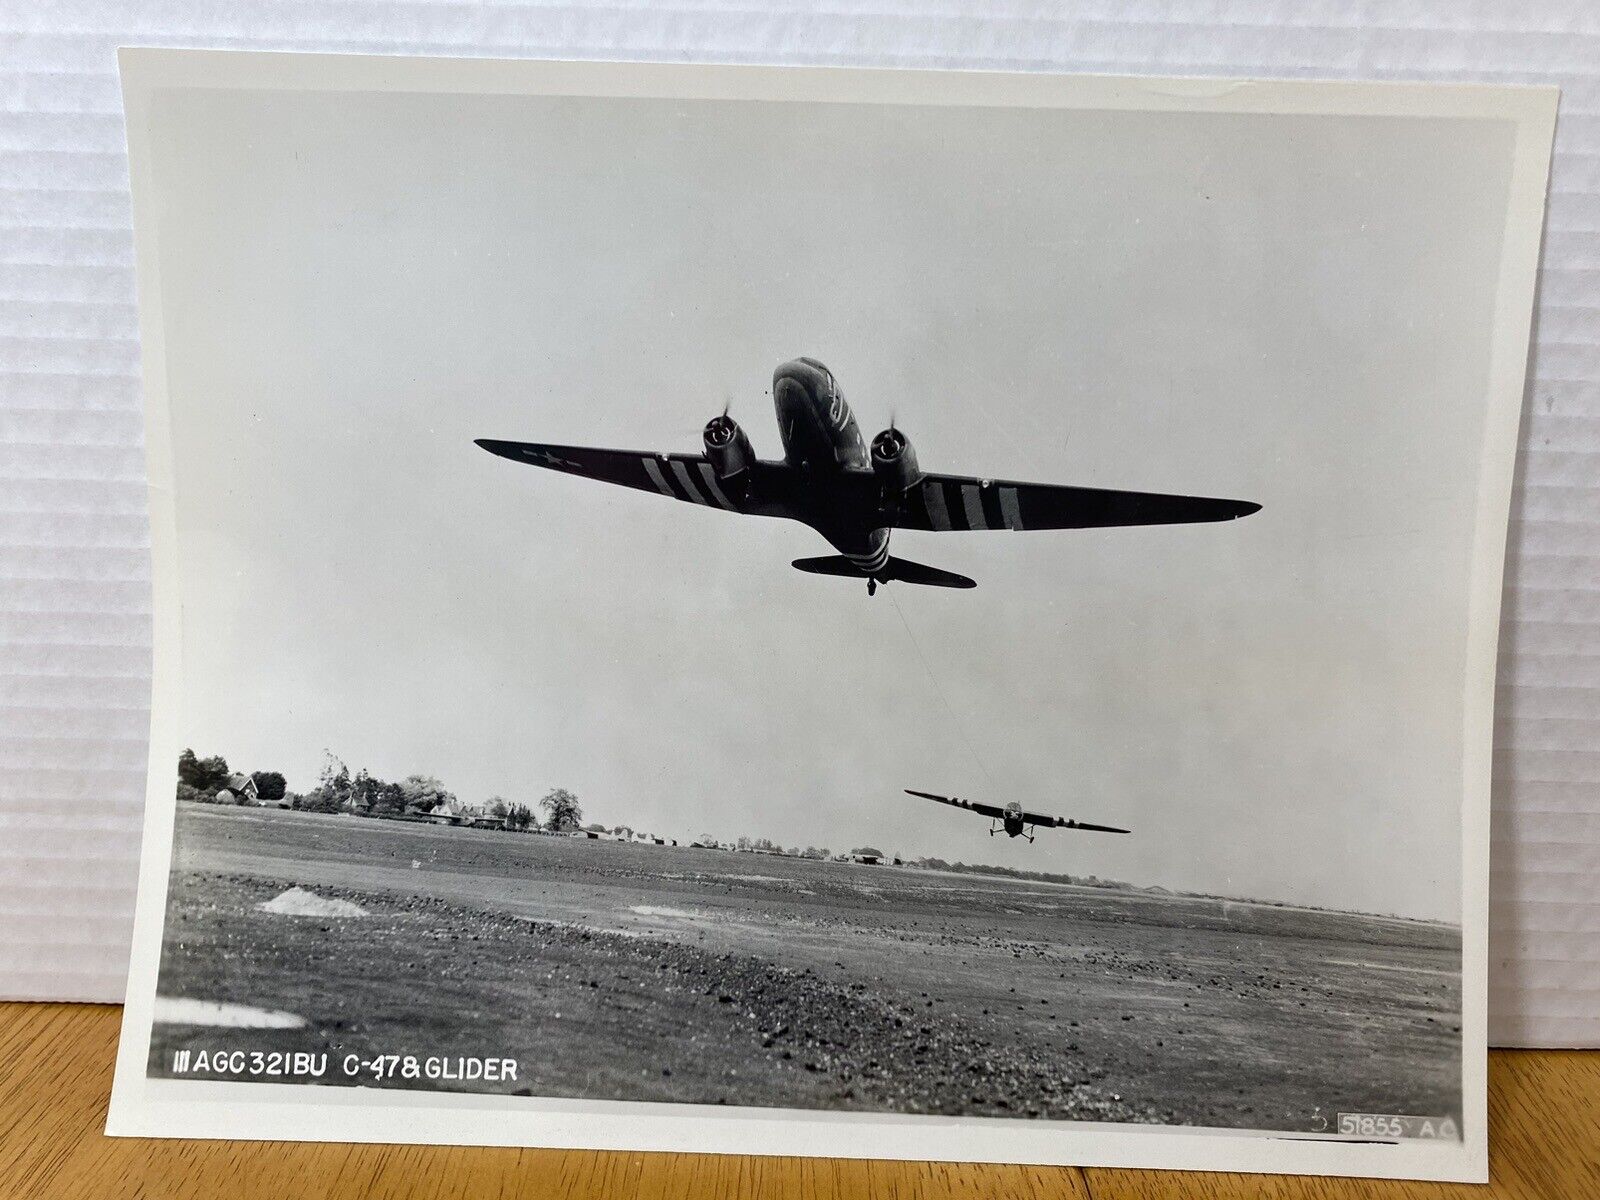 Douglas C-47D Skytrain Troop carrier C-47 on takeoff with a glider in tow.